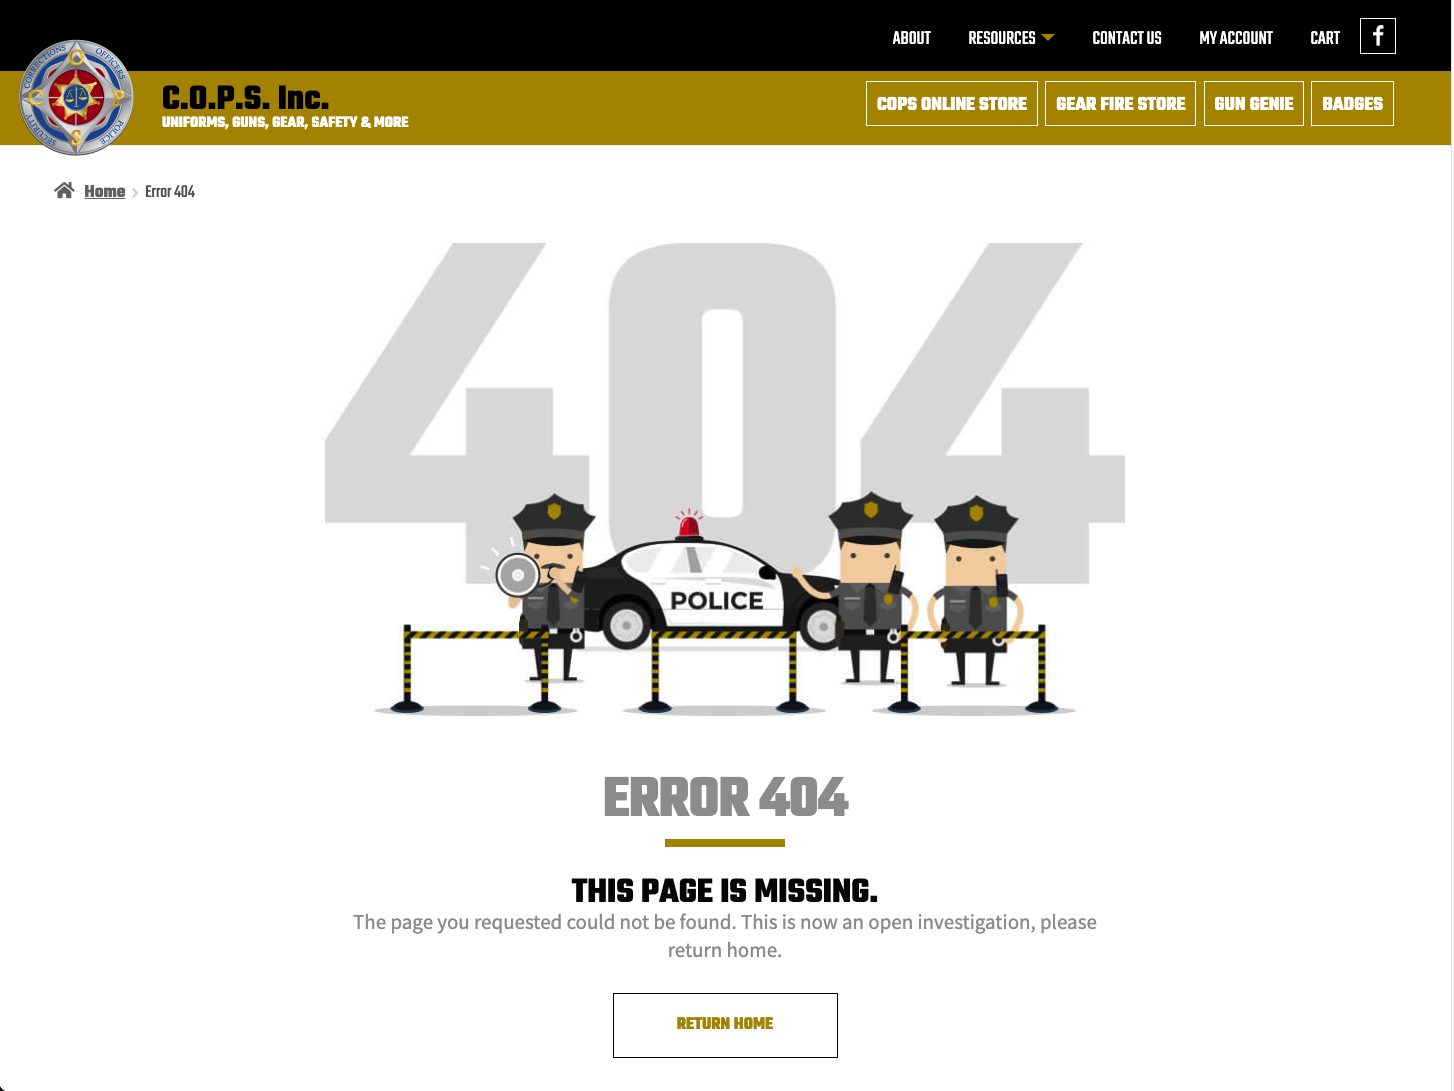 C.O.P.S. Inc. has a fun 404 page design including police and getting you where you need to go